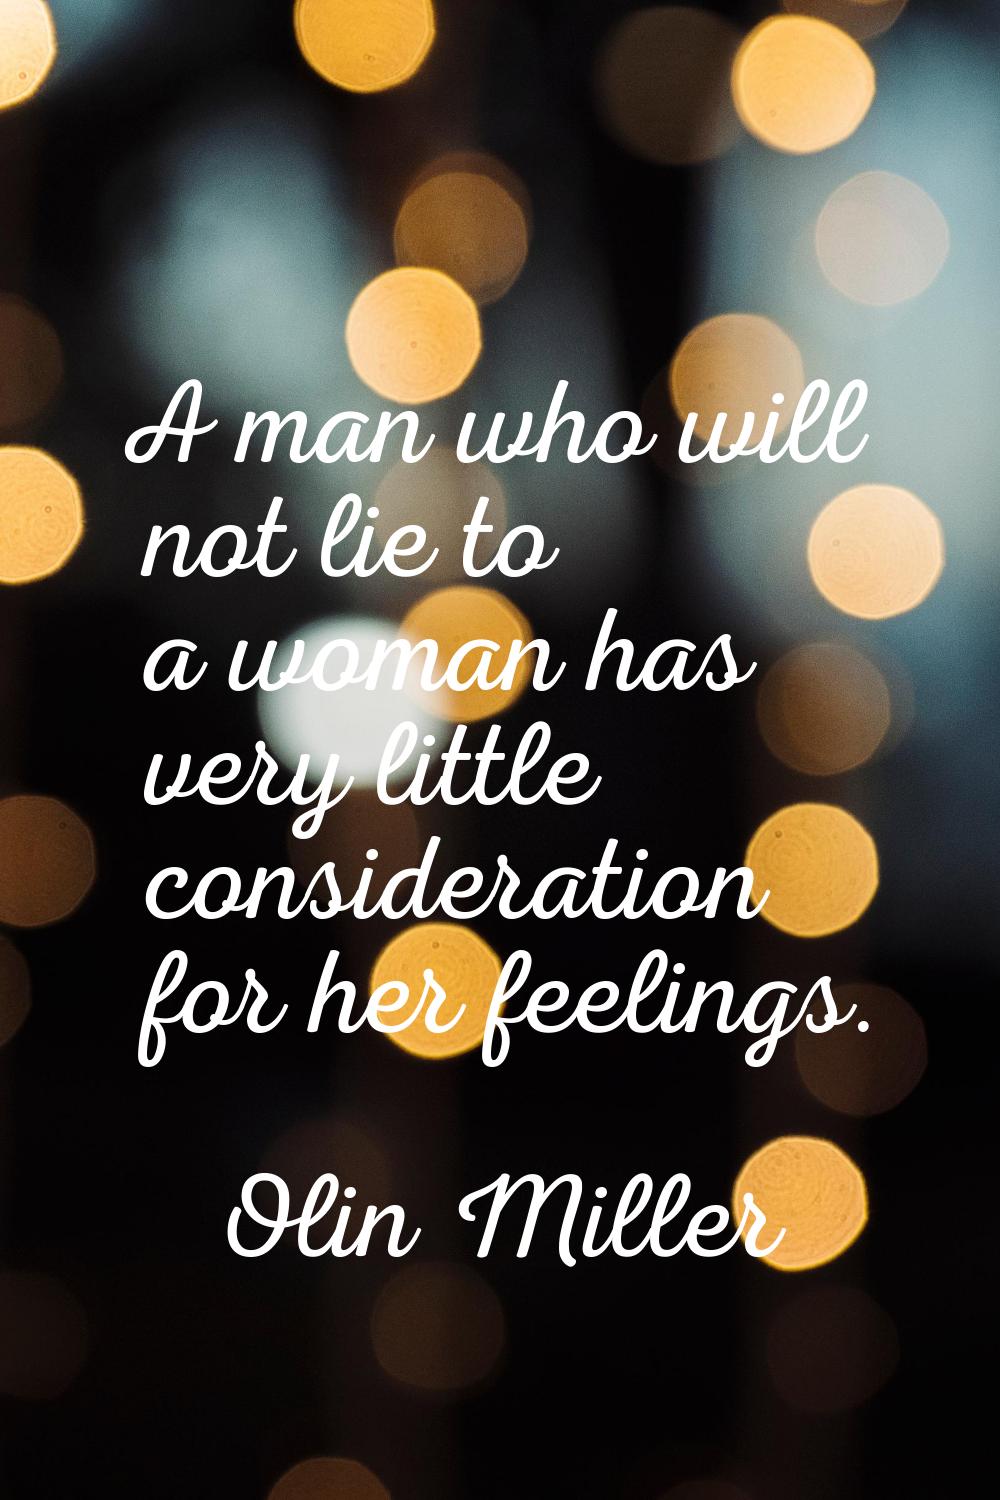 A man who will not lie to a woman has very little consideration for her feelings.